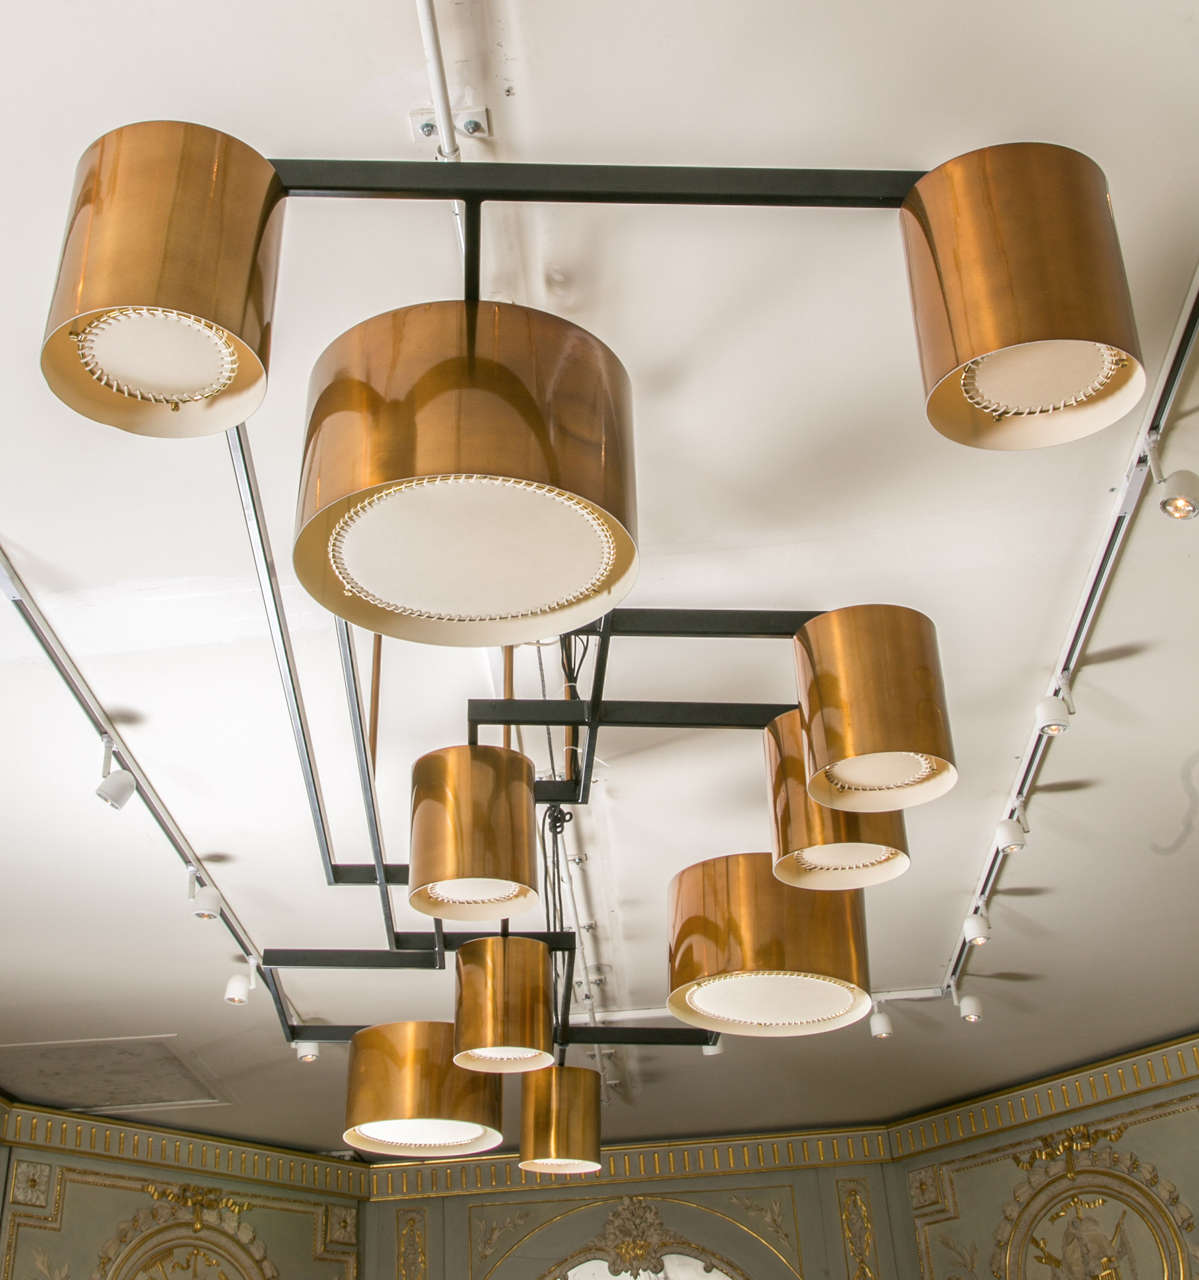 Huge chandelier with 10 copper shades, totally rewired, prototype realized by an architect